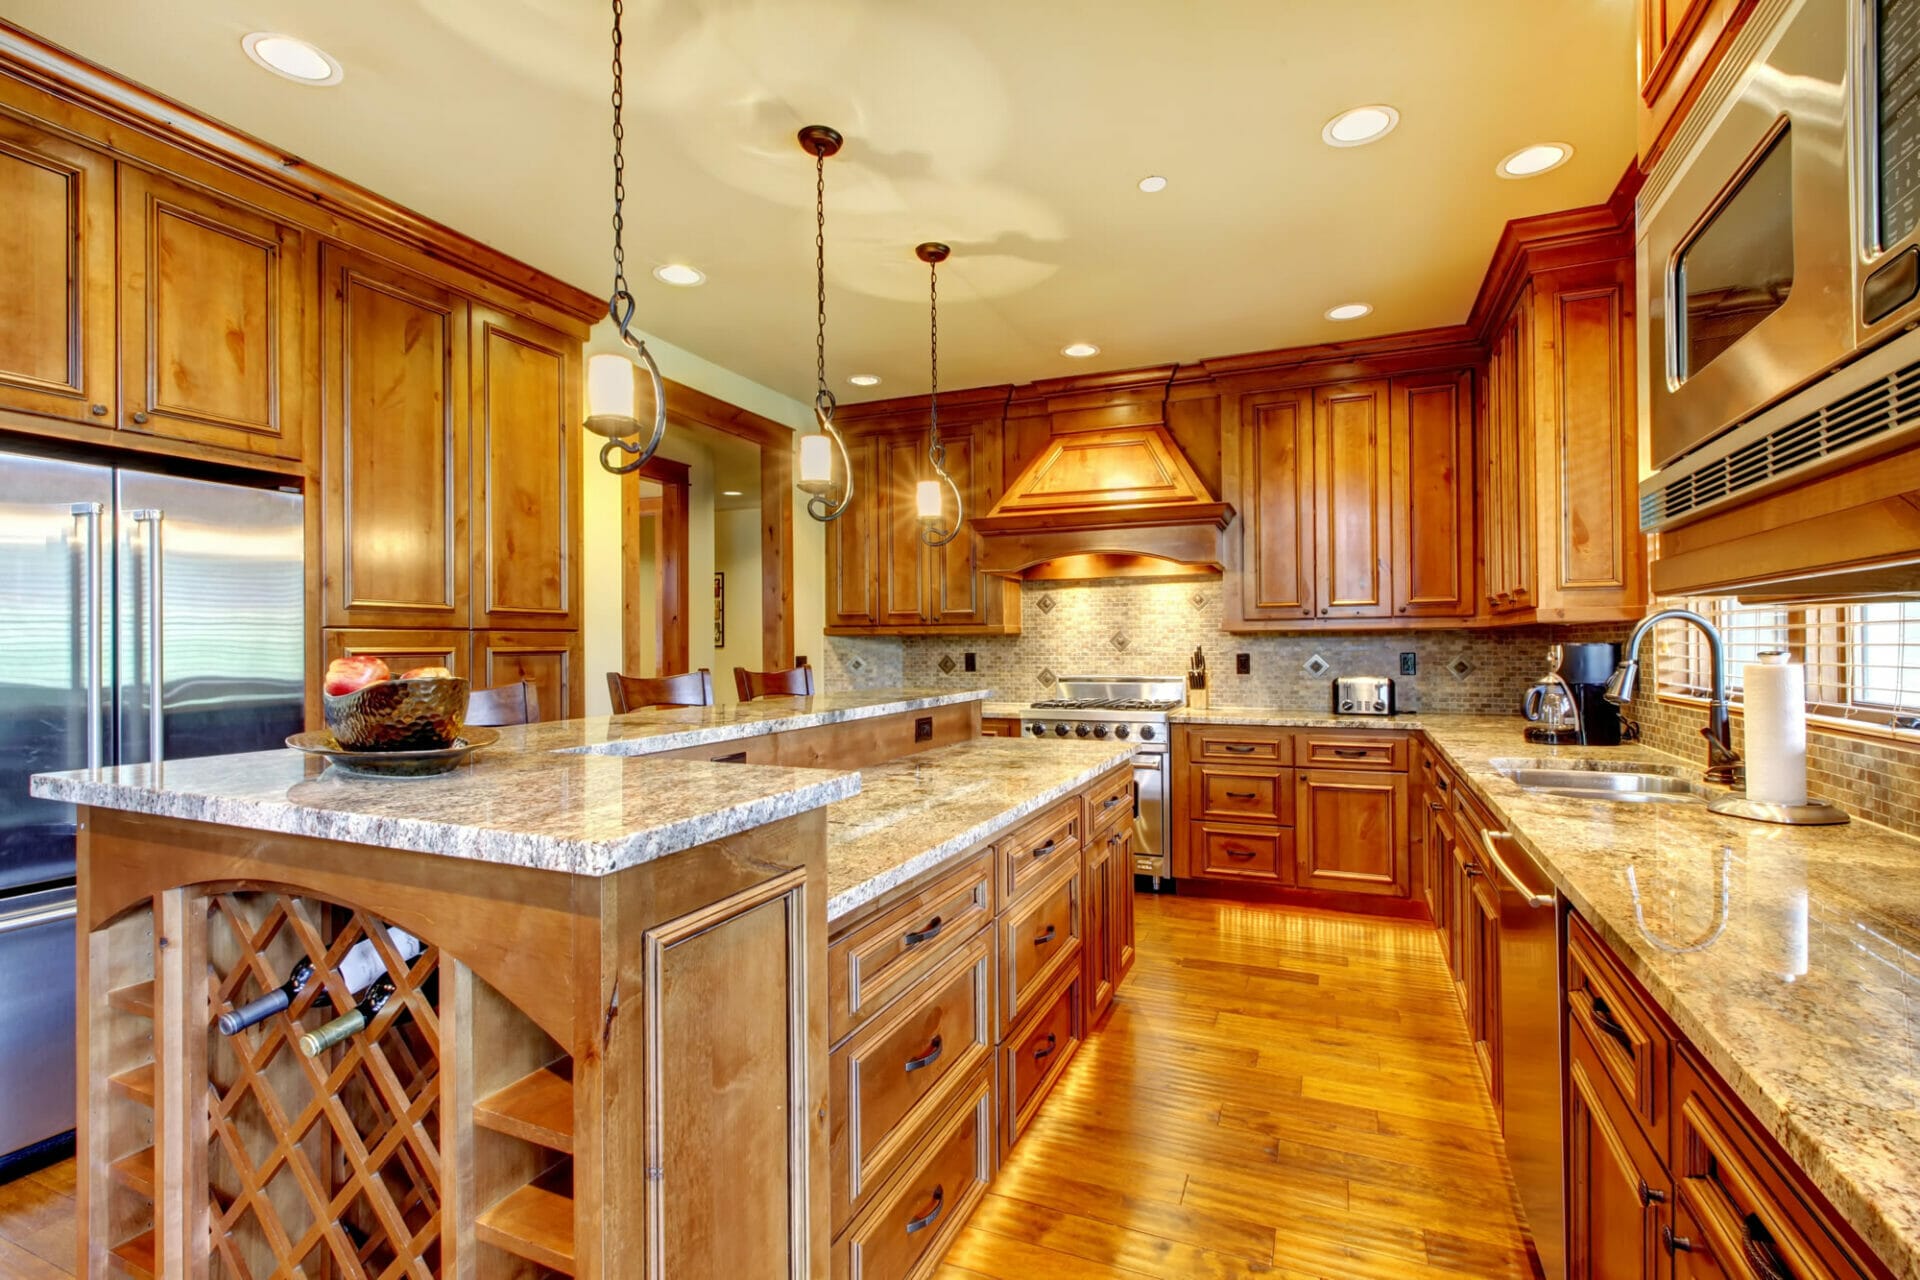 Custom luxury kitchen with wooden cabinets and granite counter tops